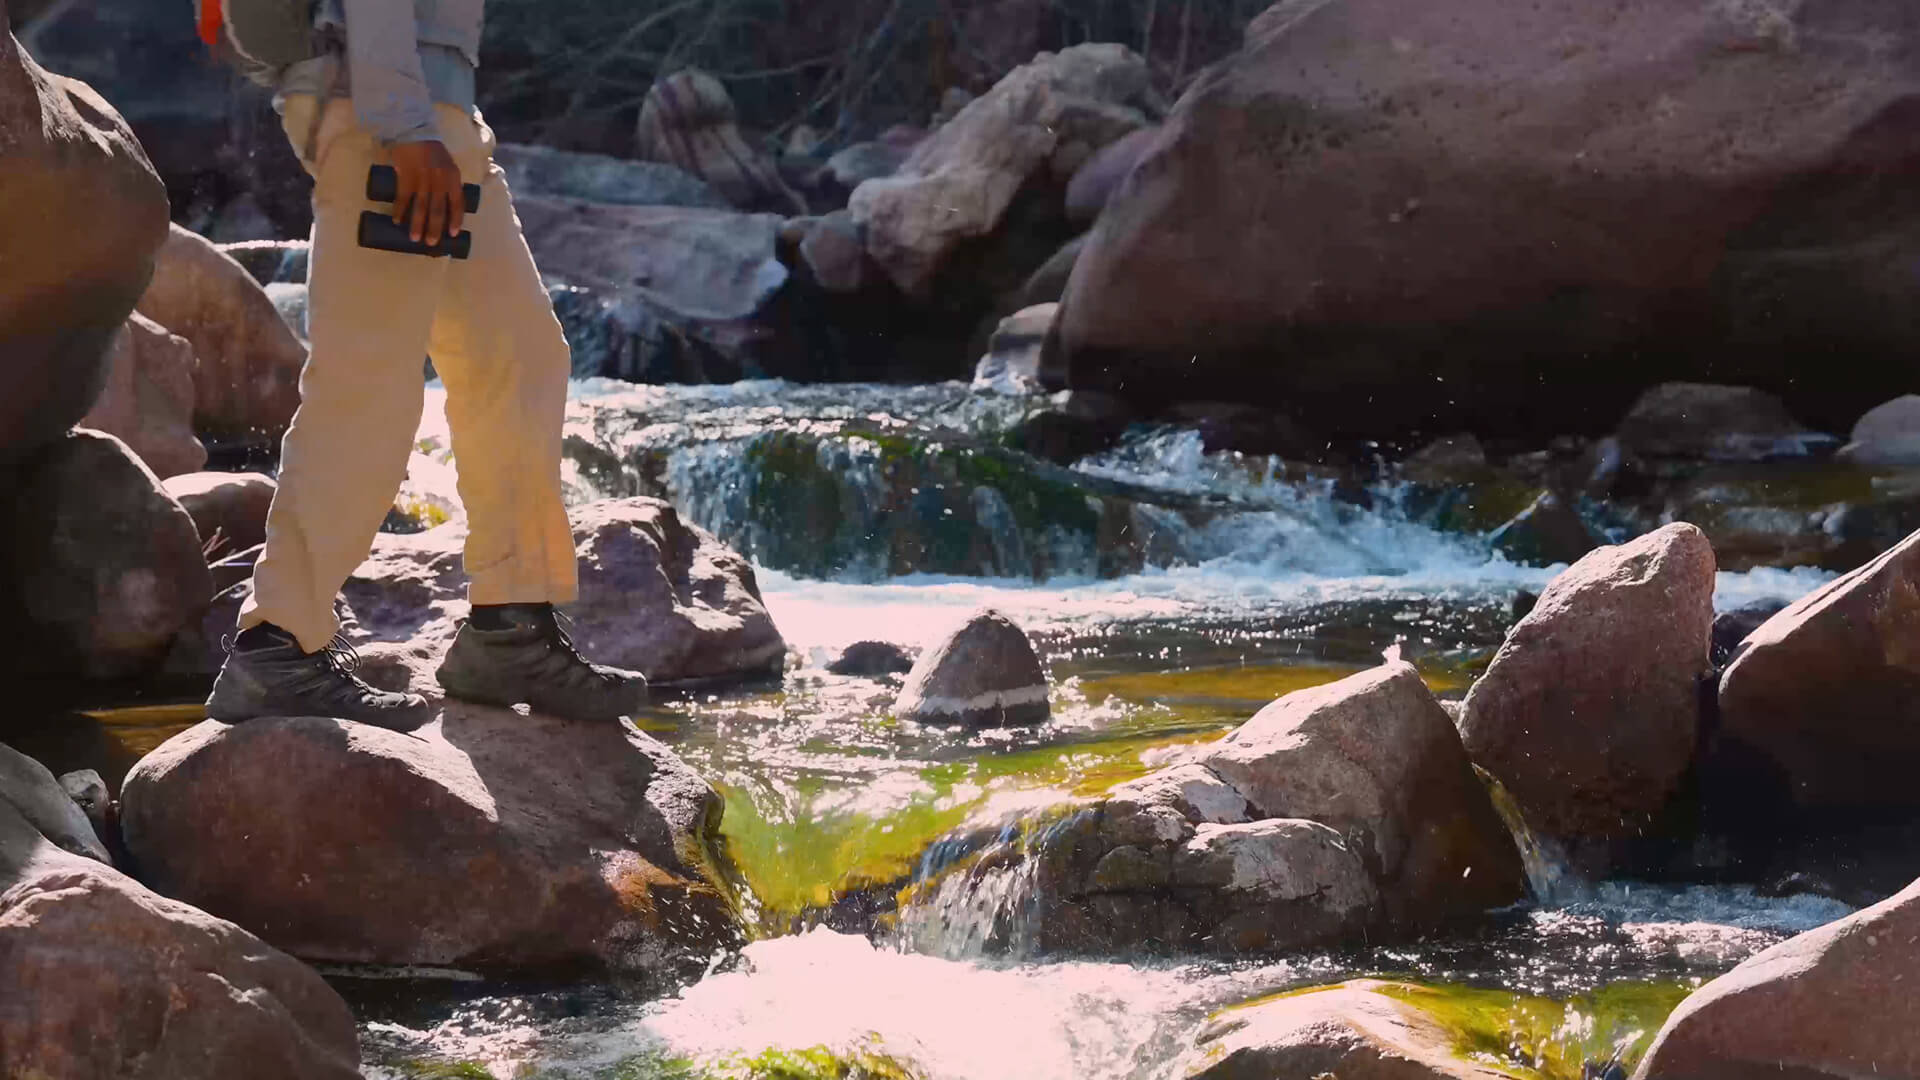 Person crossing a stream while holding a pair of Prostaff P3 binoculars